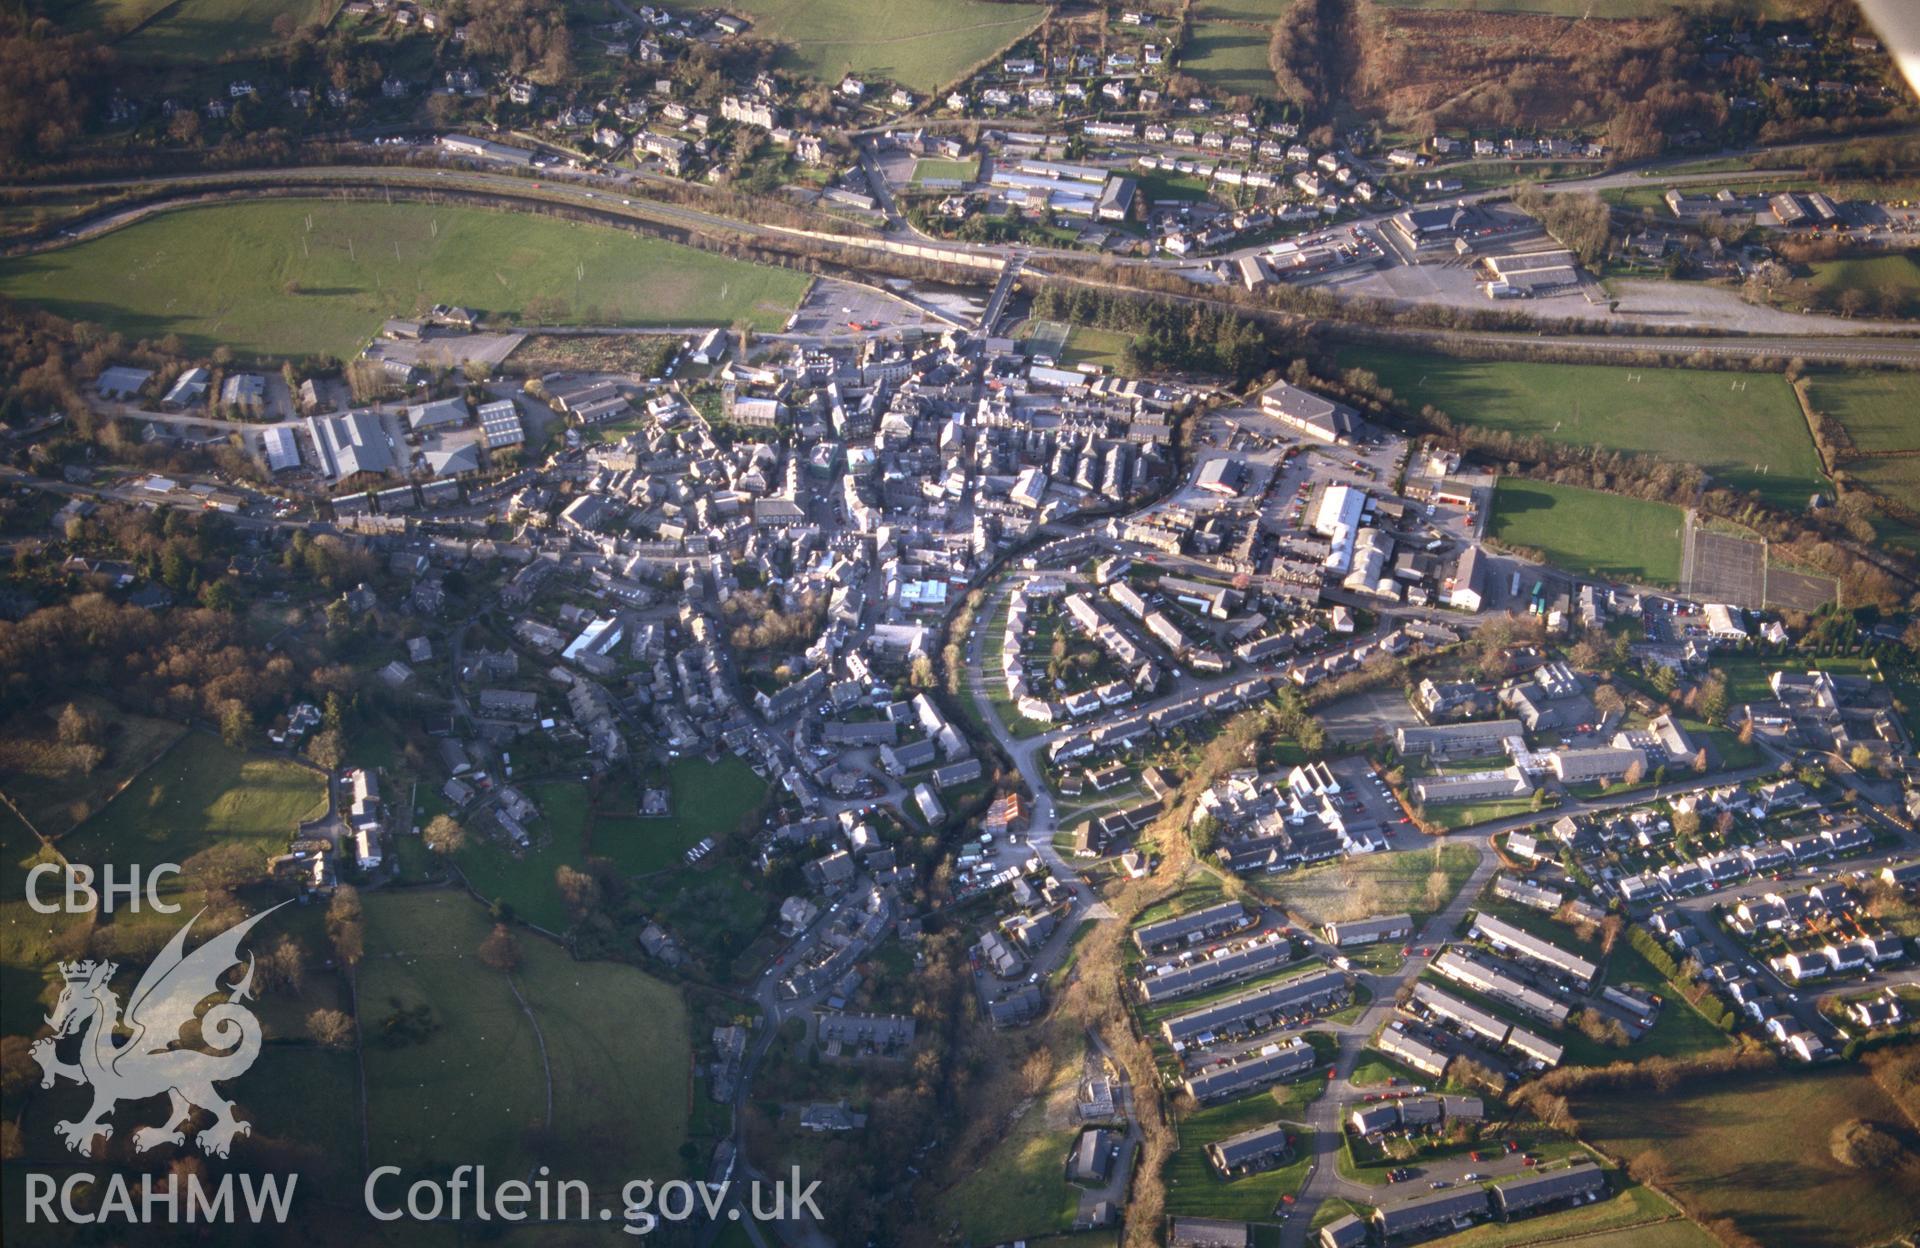 RCAHMW colour slide oblique aerial photograph of Dolgellau, taken on 17/03/1999 by Toby Driver